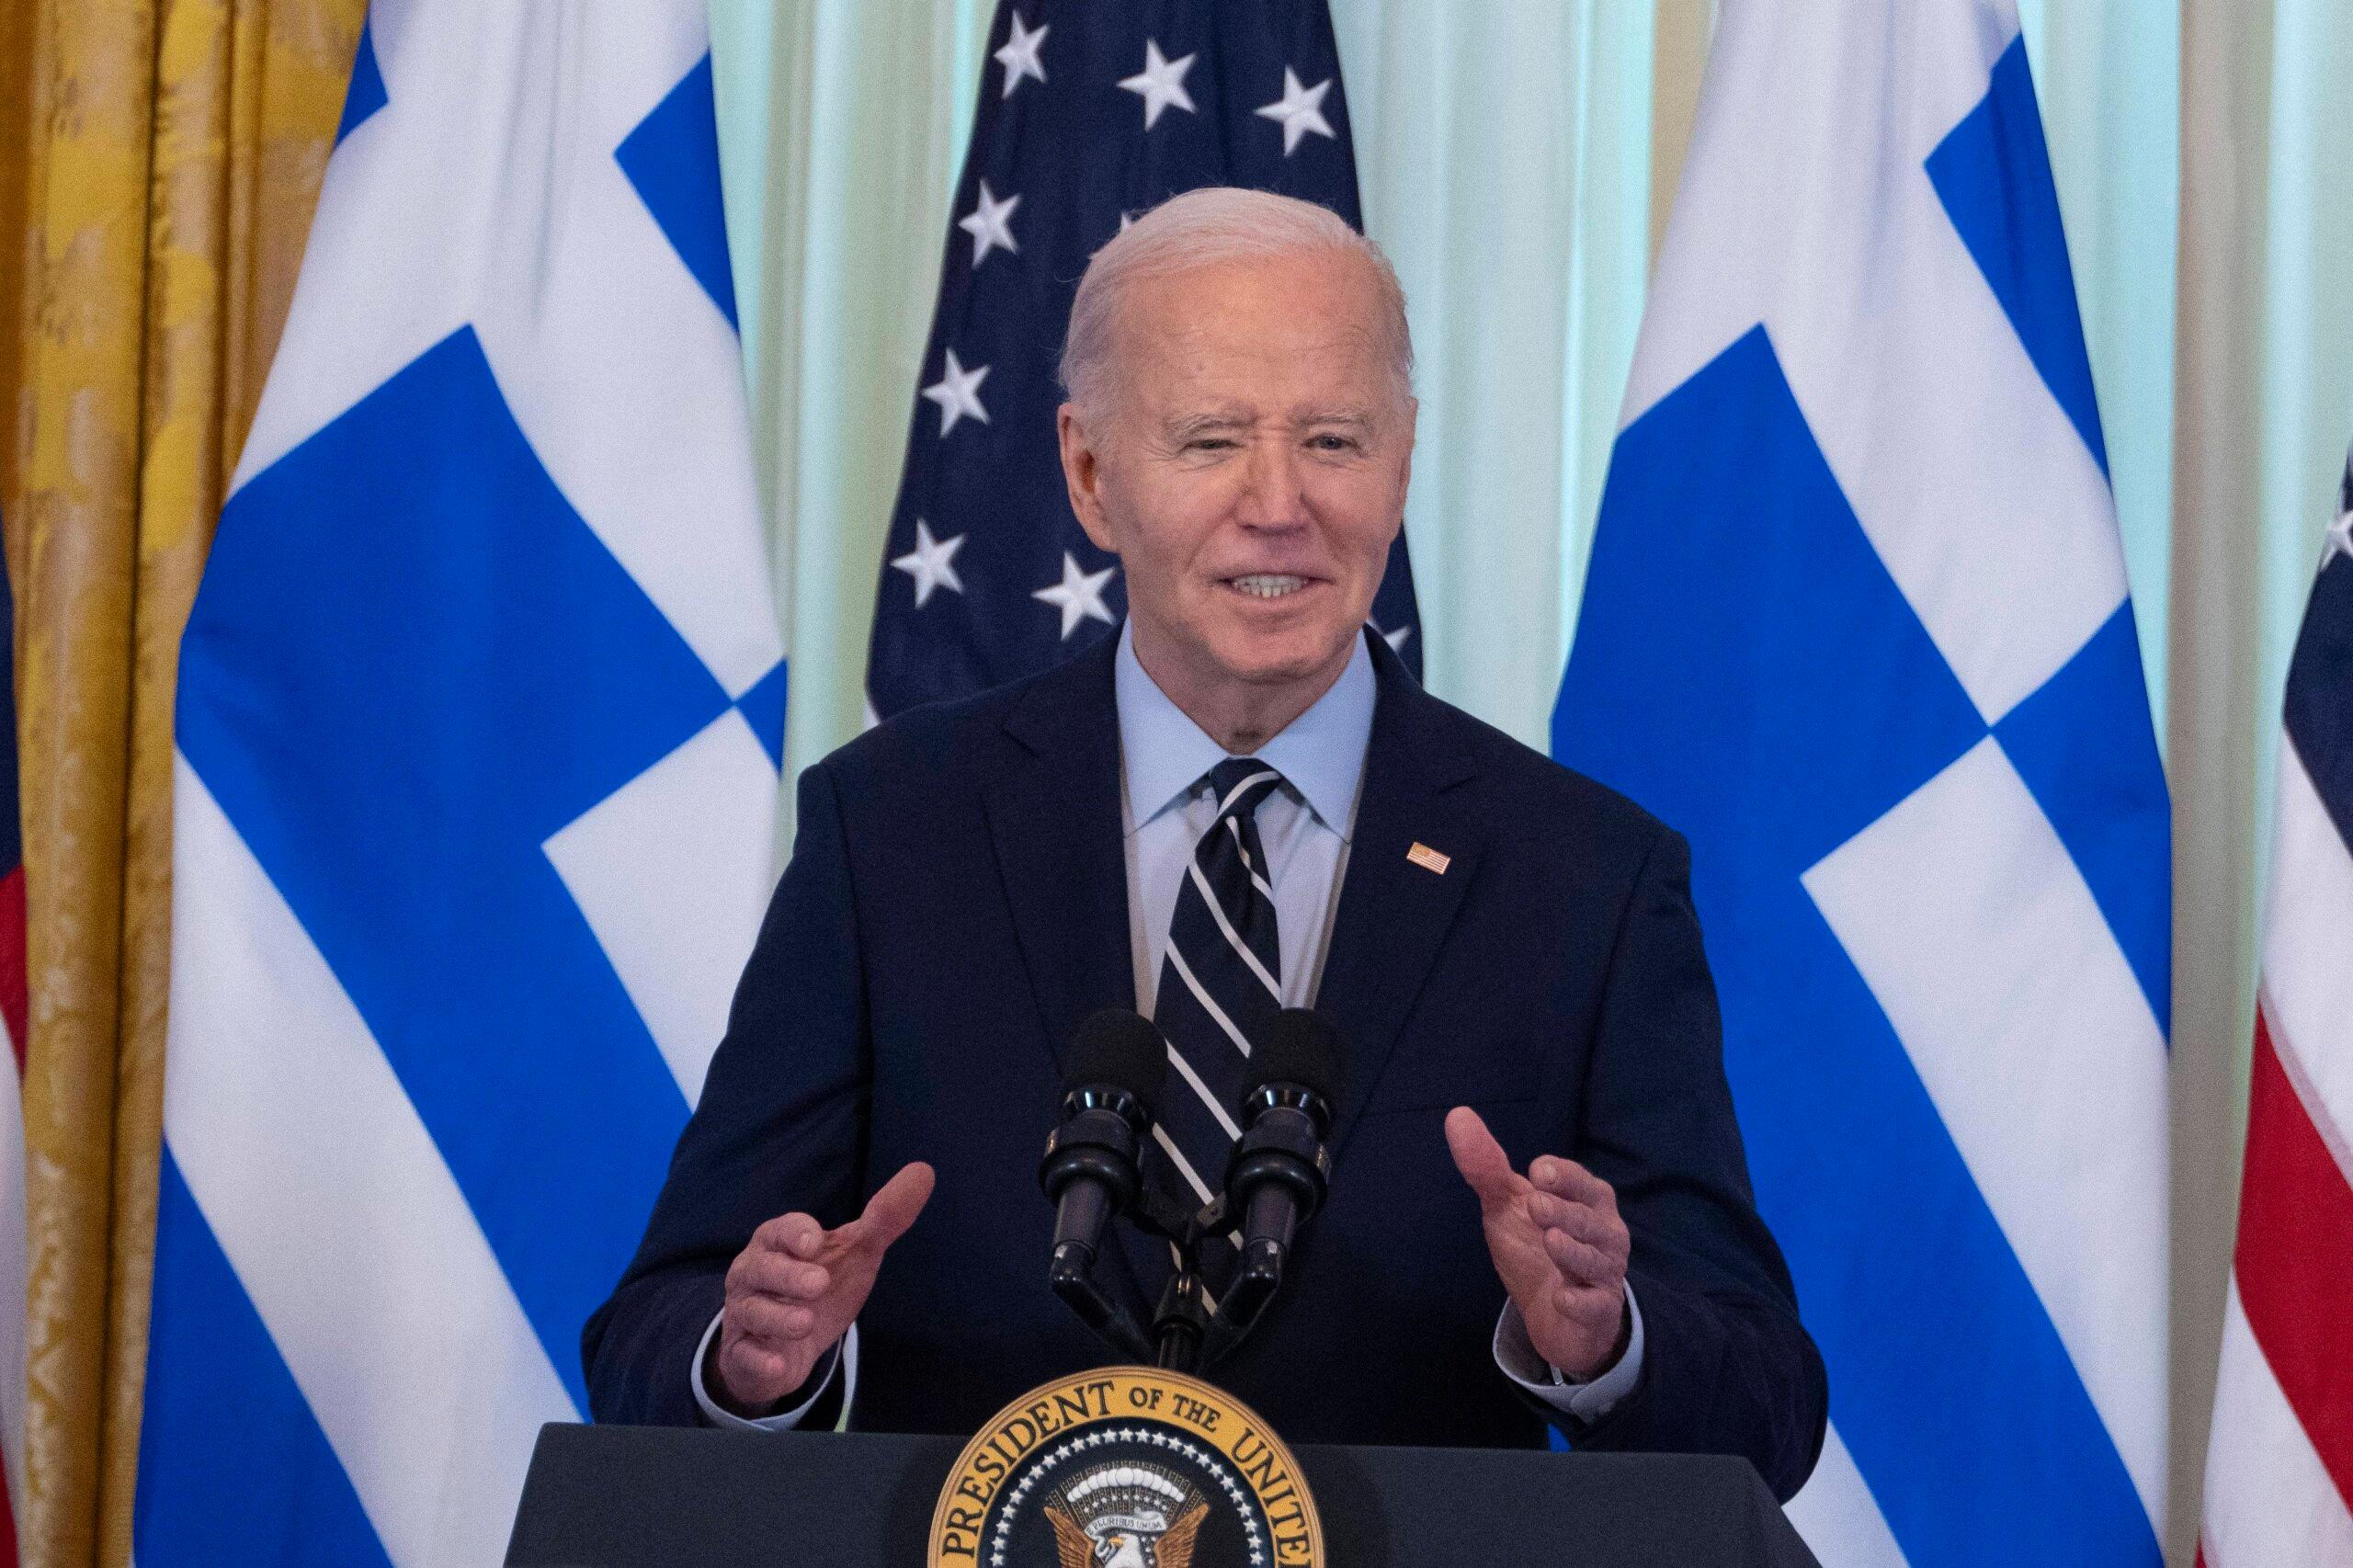 President Joe Biden hosts a reception in honor of Greece's Independence Day